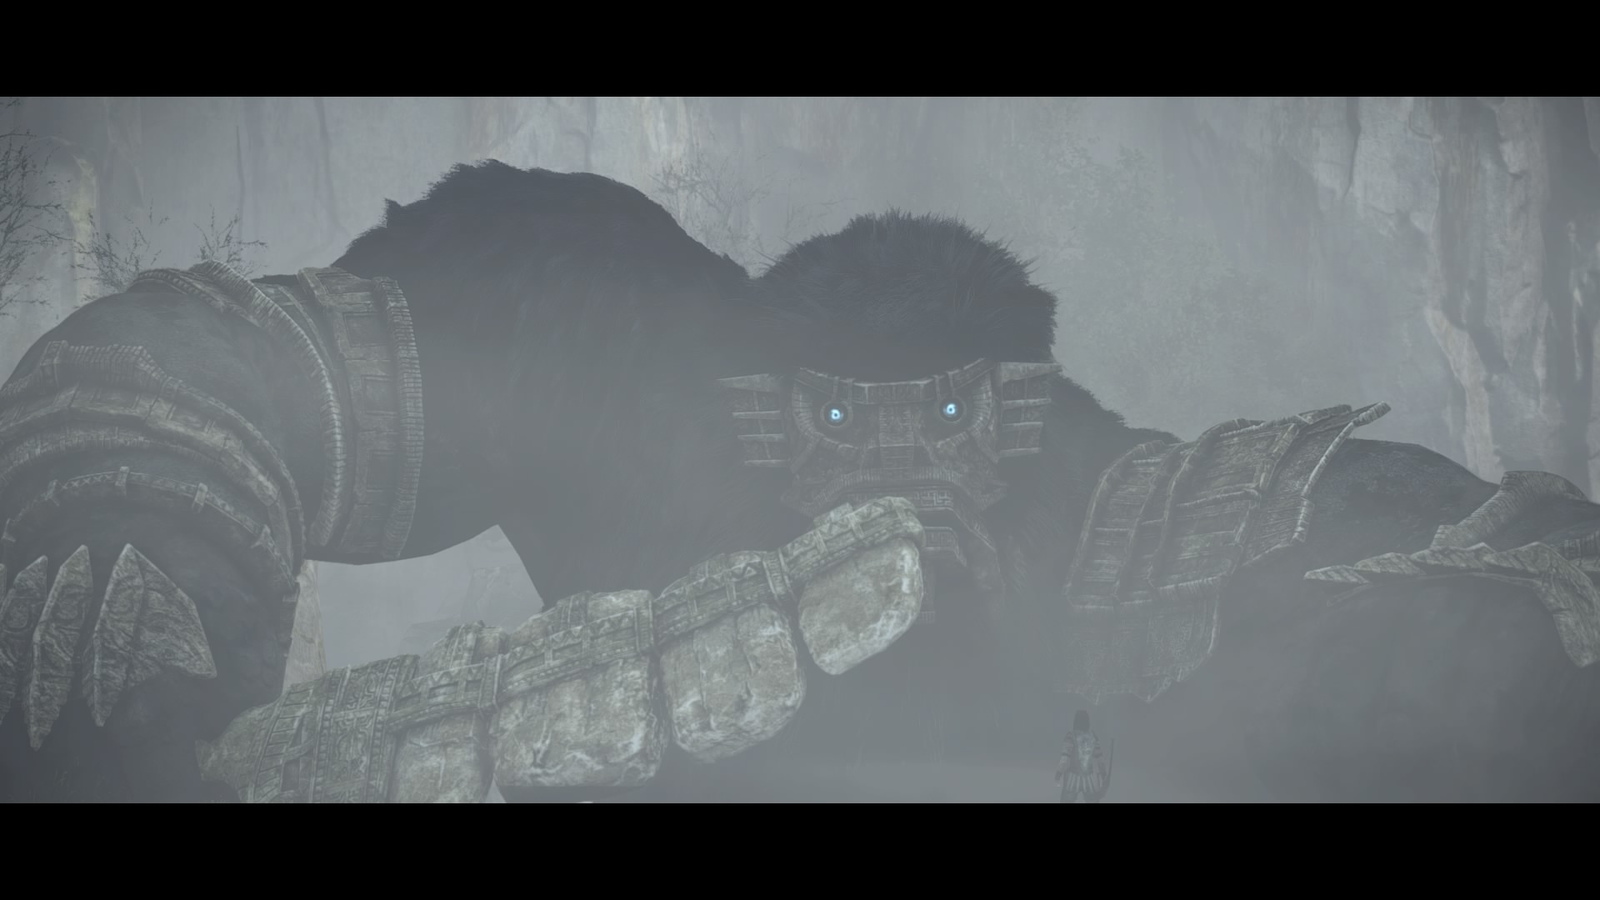 Shadow of the Colossus Review - On The Shoulders Of Giants - Game